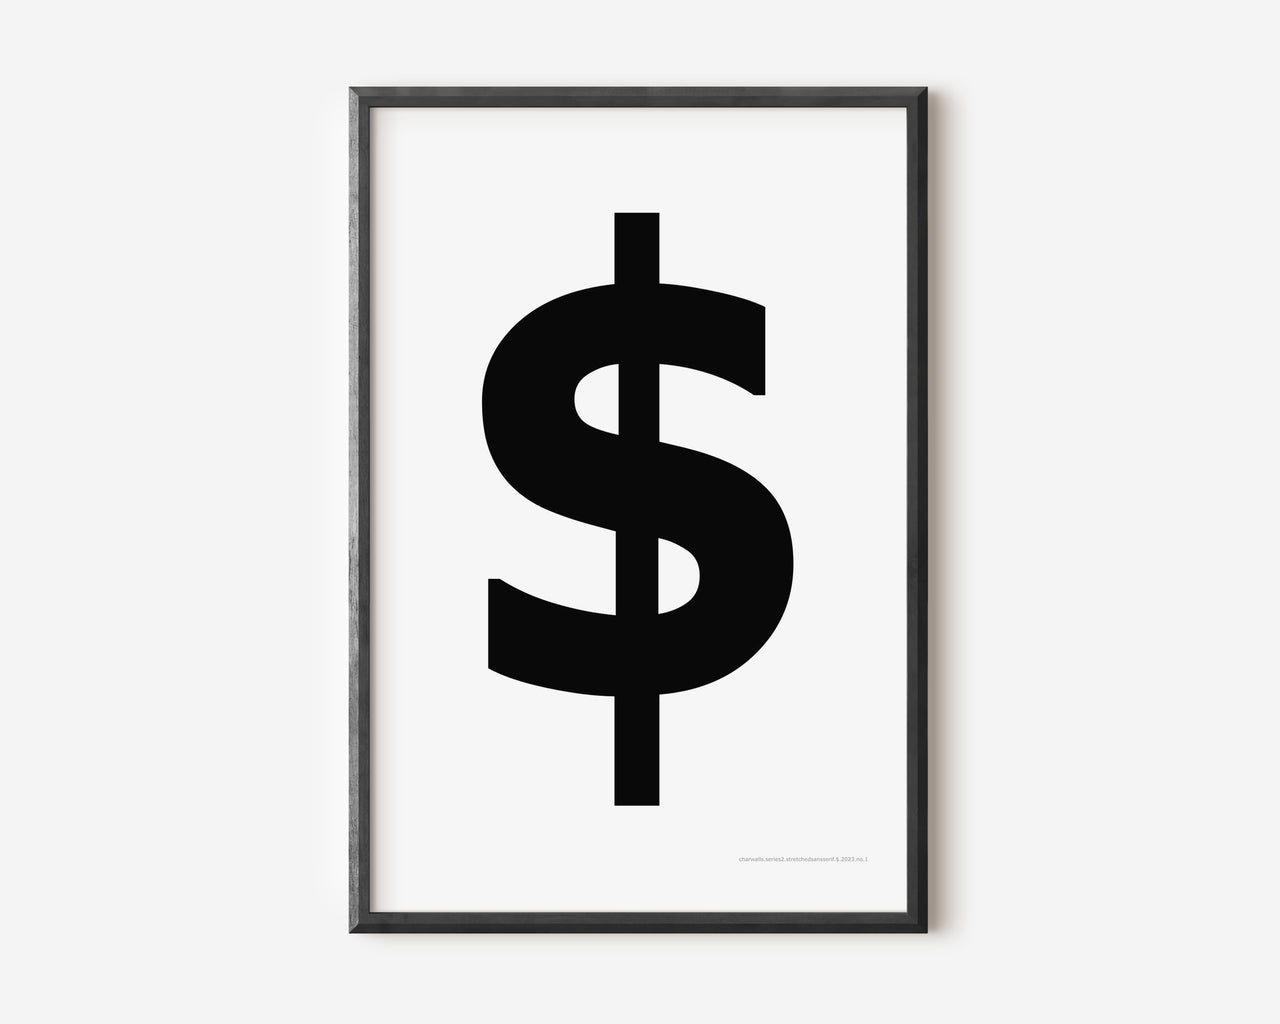 Modern symbol art print with a black dollar sign on a white background.